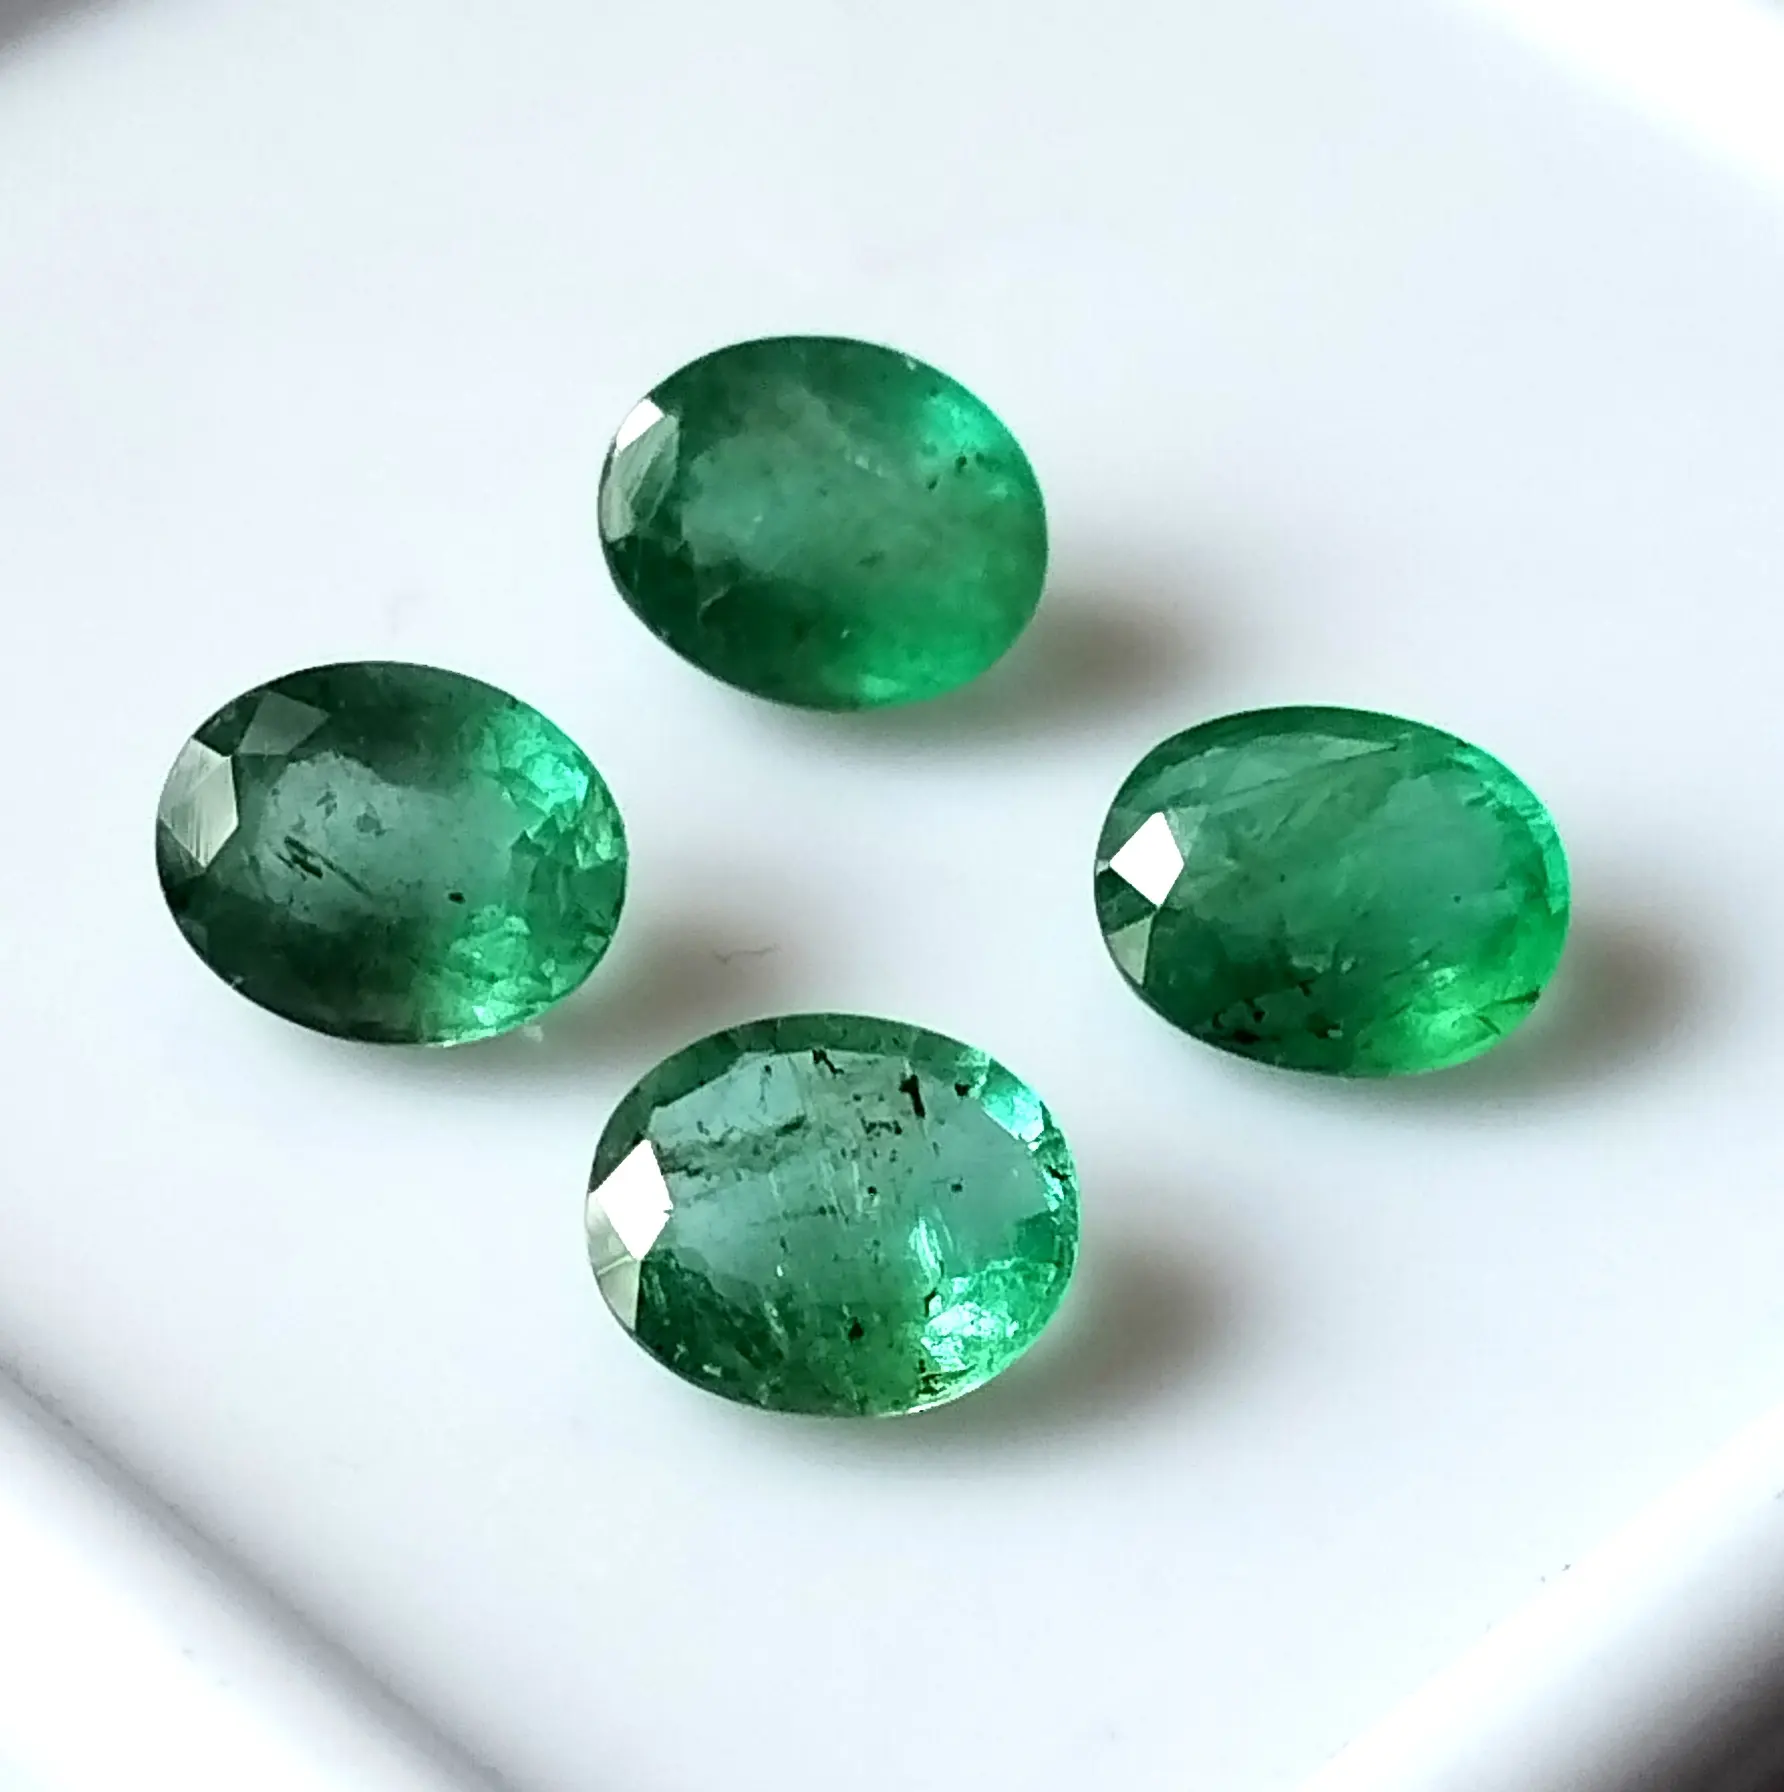 5X6 mm Oval Shape Emerald Faceted Cut Natural Zambian Loose Gemstone Genuine Real Green Color Stone Price Per Piece